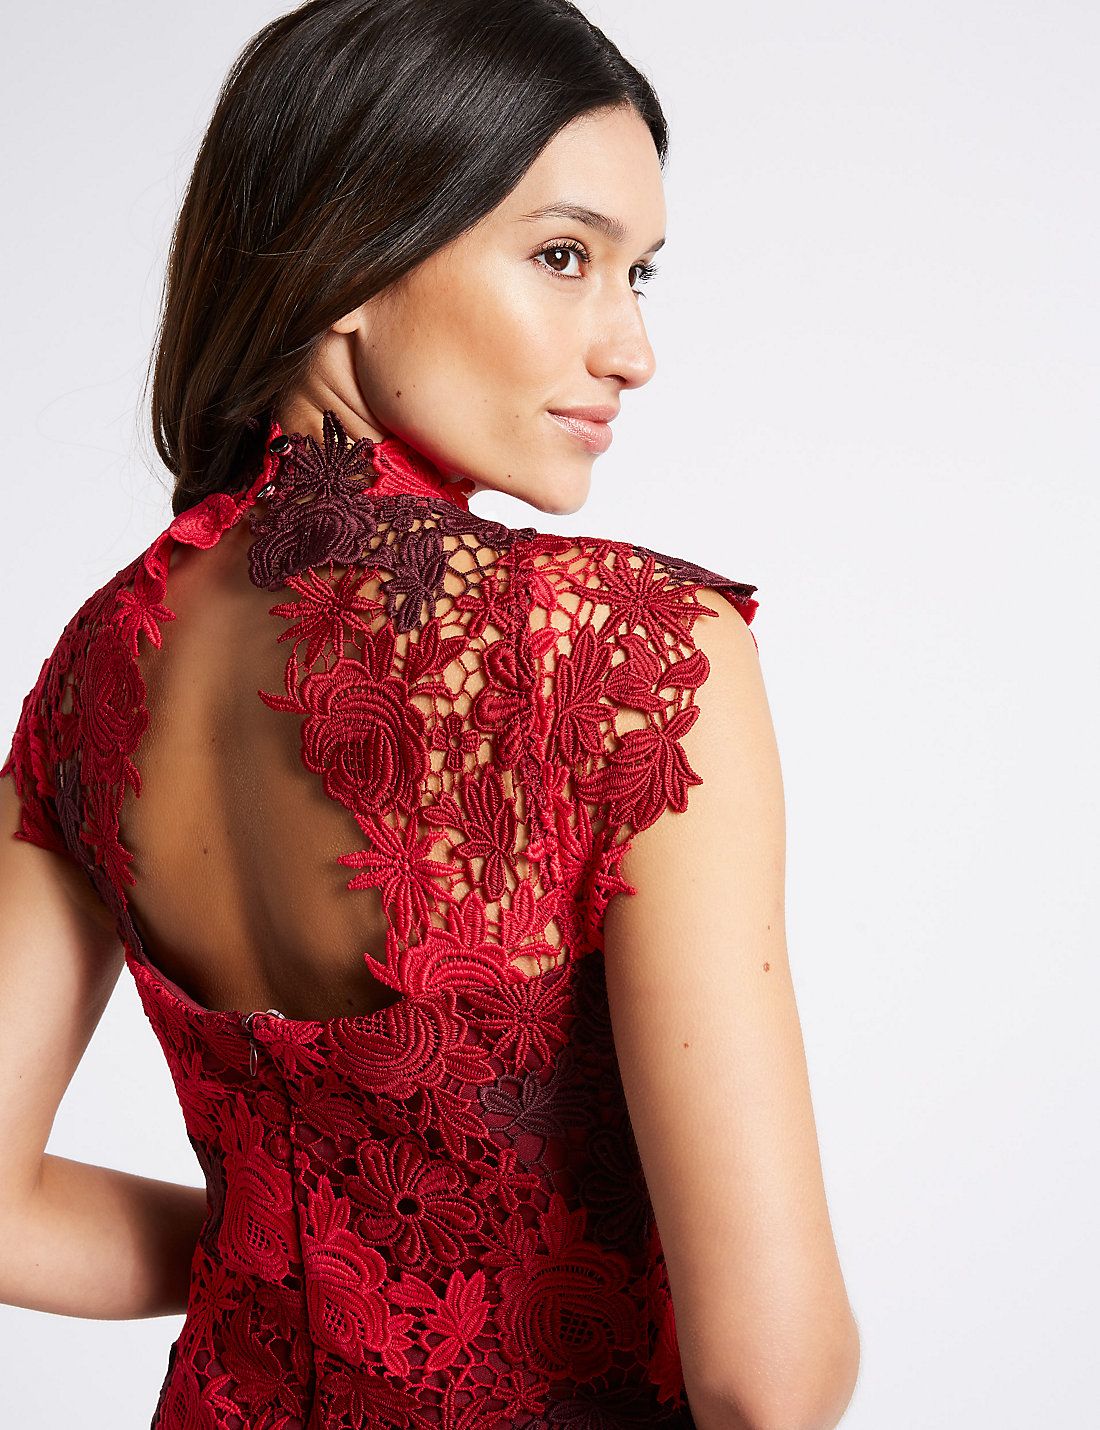 m&s red lace dress